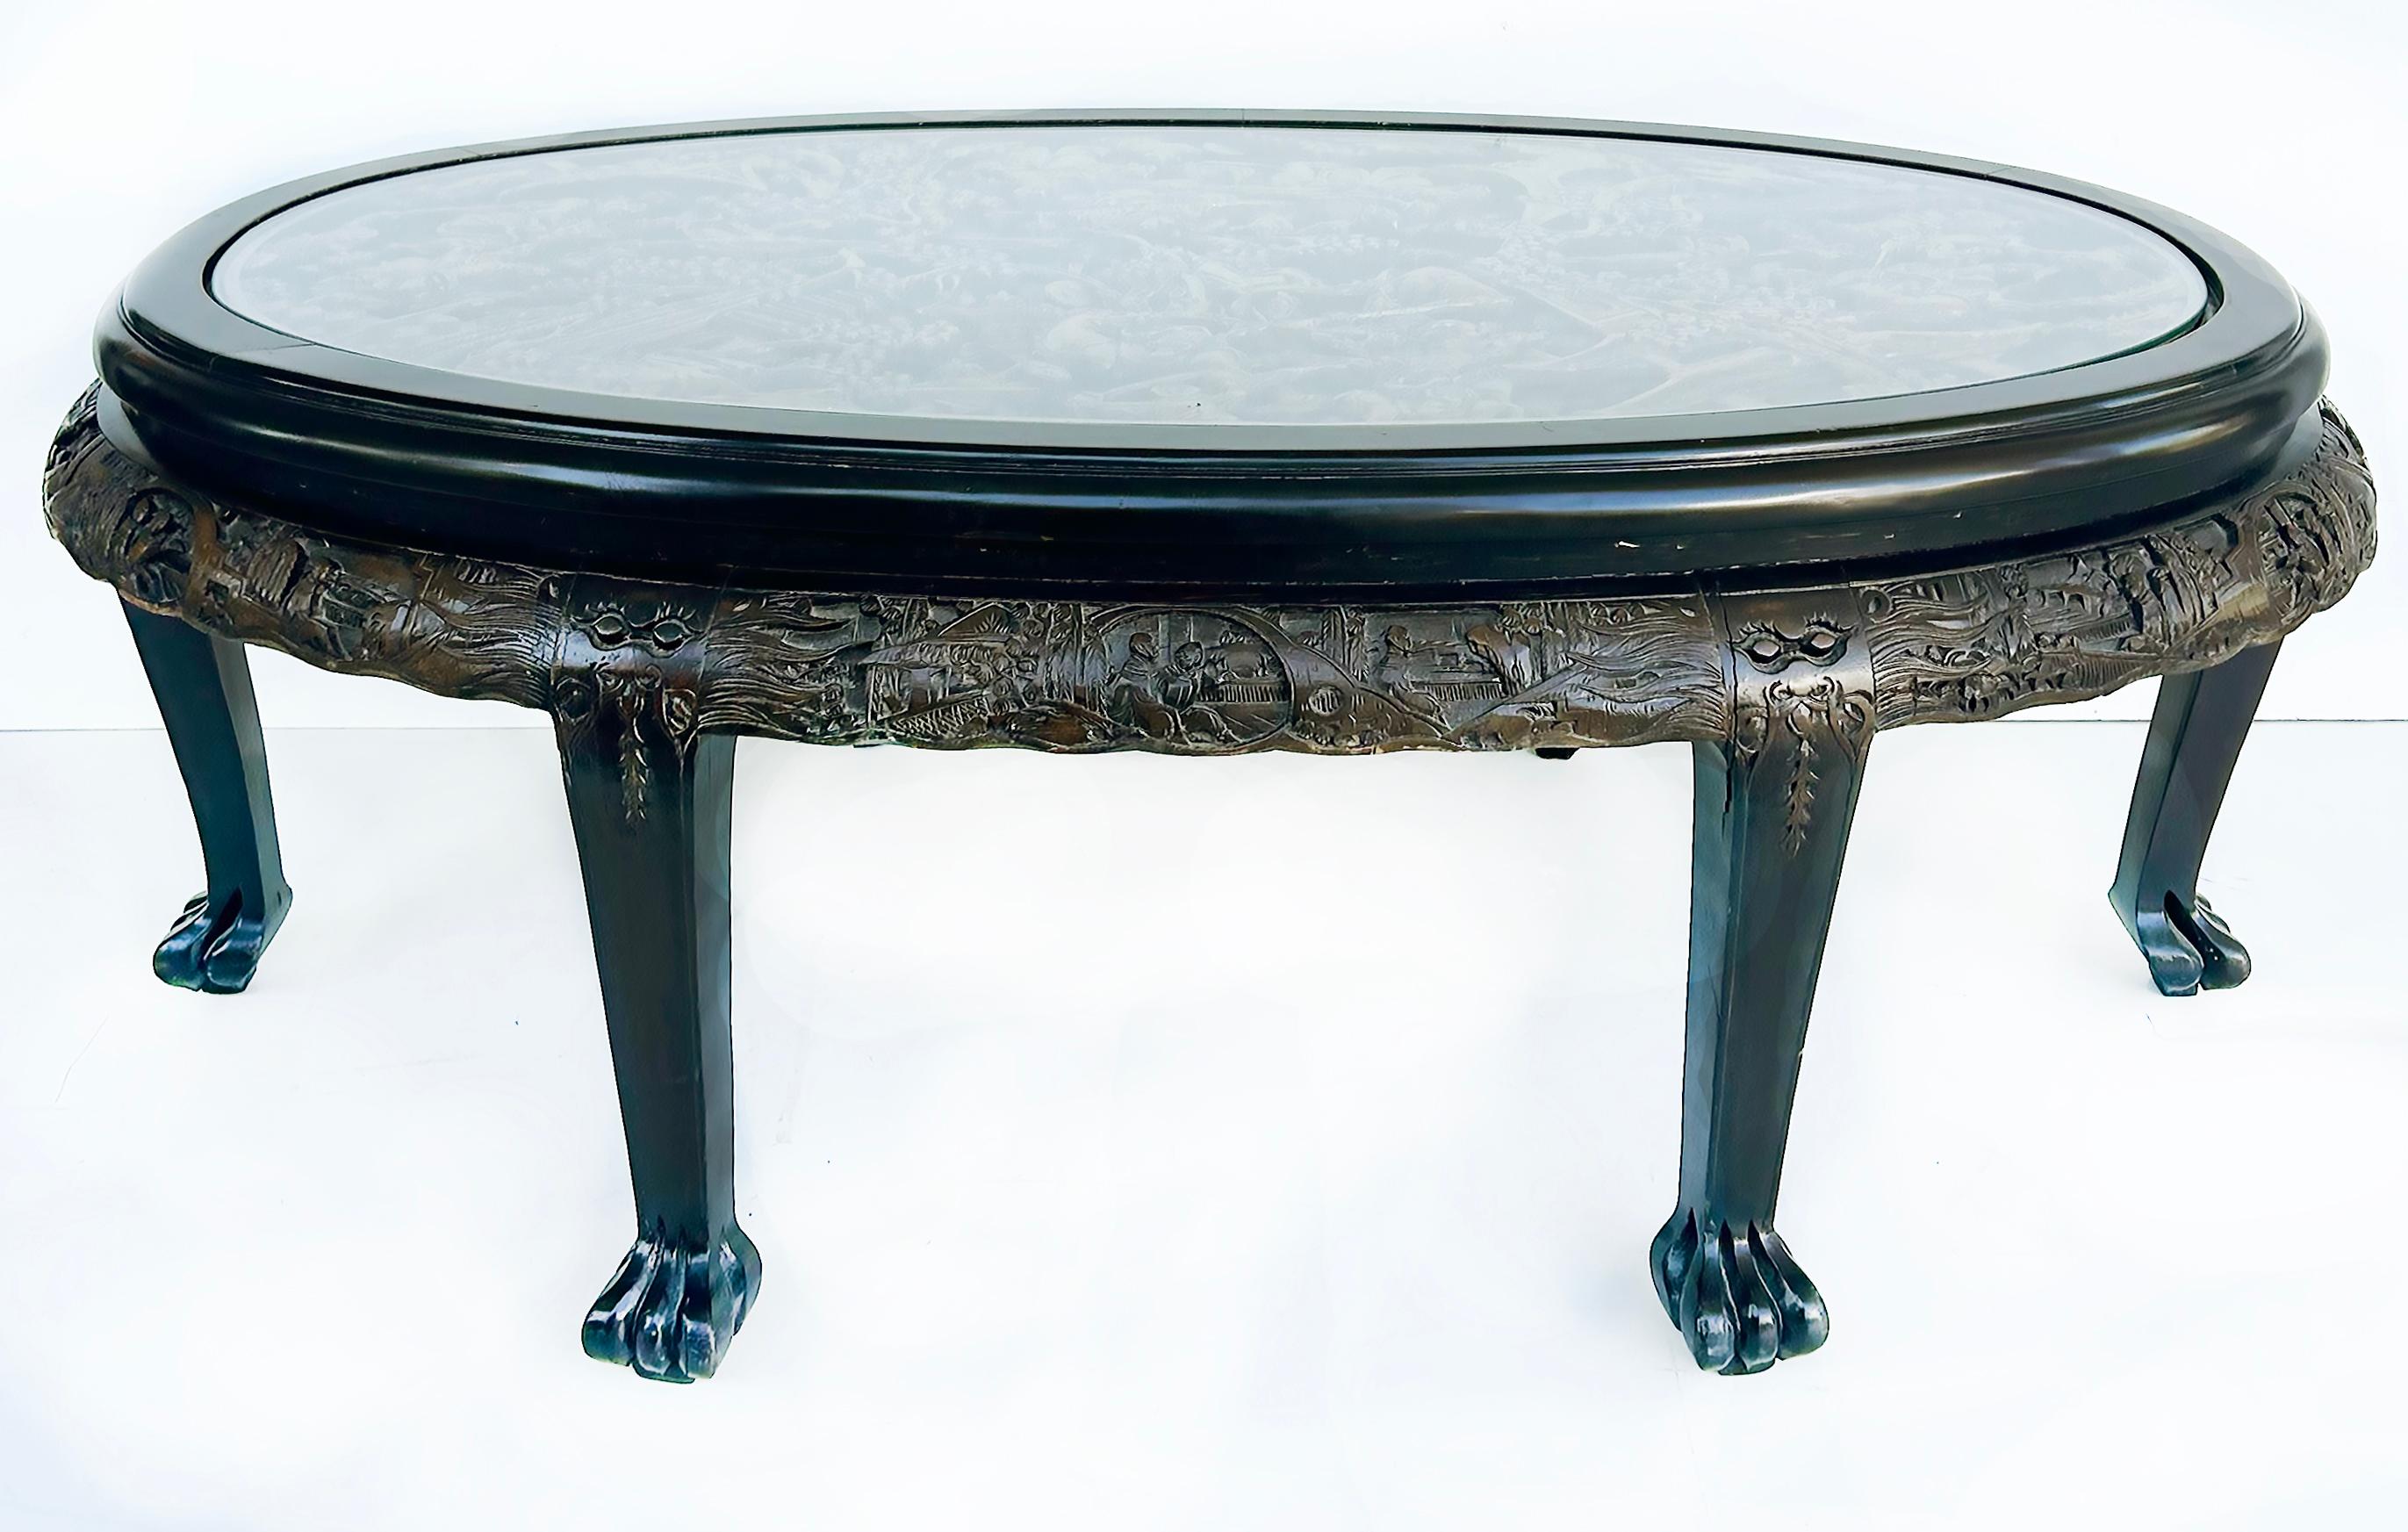 Heavily Carved Chinoiserie Oval Coffee/Cocktail Table with Inset Glass Top 

Offered for sale is a heavily carved chinoiserie oval coffee/cocktail table with an inset glass top and six tapering legs with claw feet.  The top is beautifully and deeply